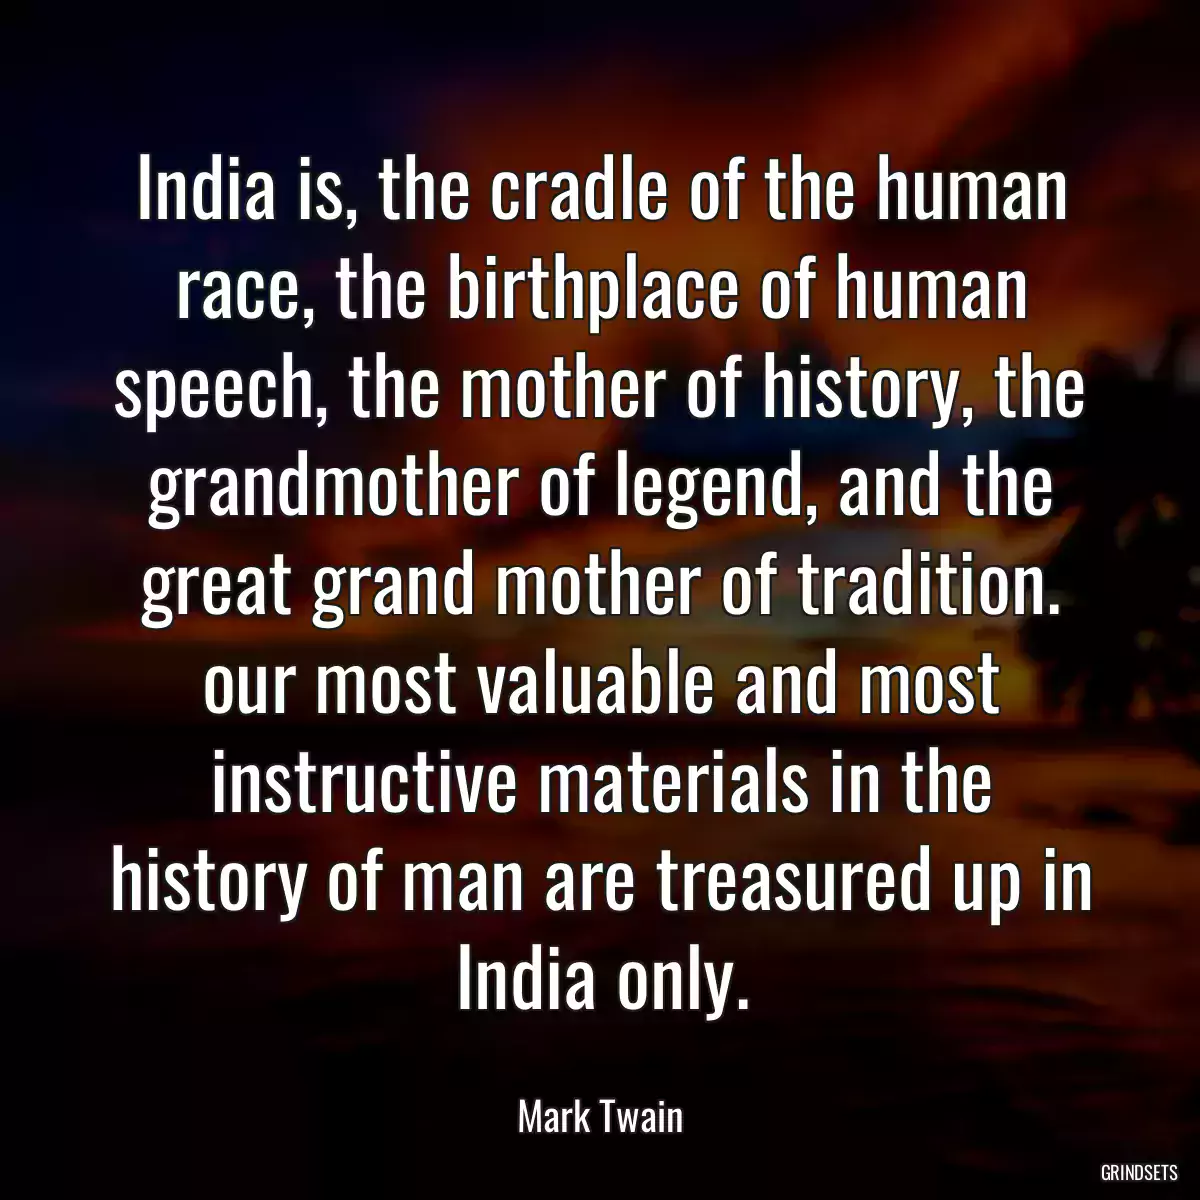 India is, the cradle of the human race, the birthplace of human speech, the mother of history, the grandmother of legend, and the great grand mother of tradition. our most valuable and most instructive materials in the history of man are treasured up in India only.